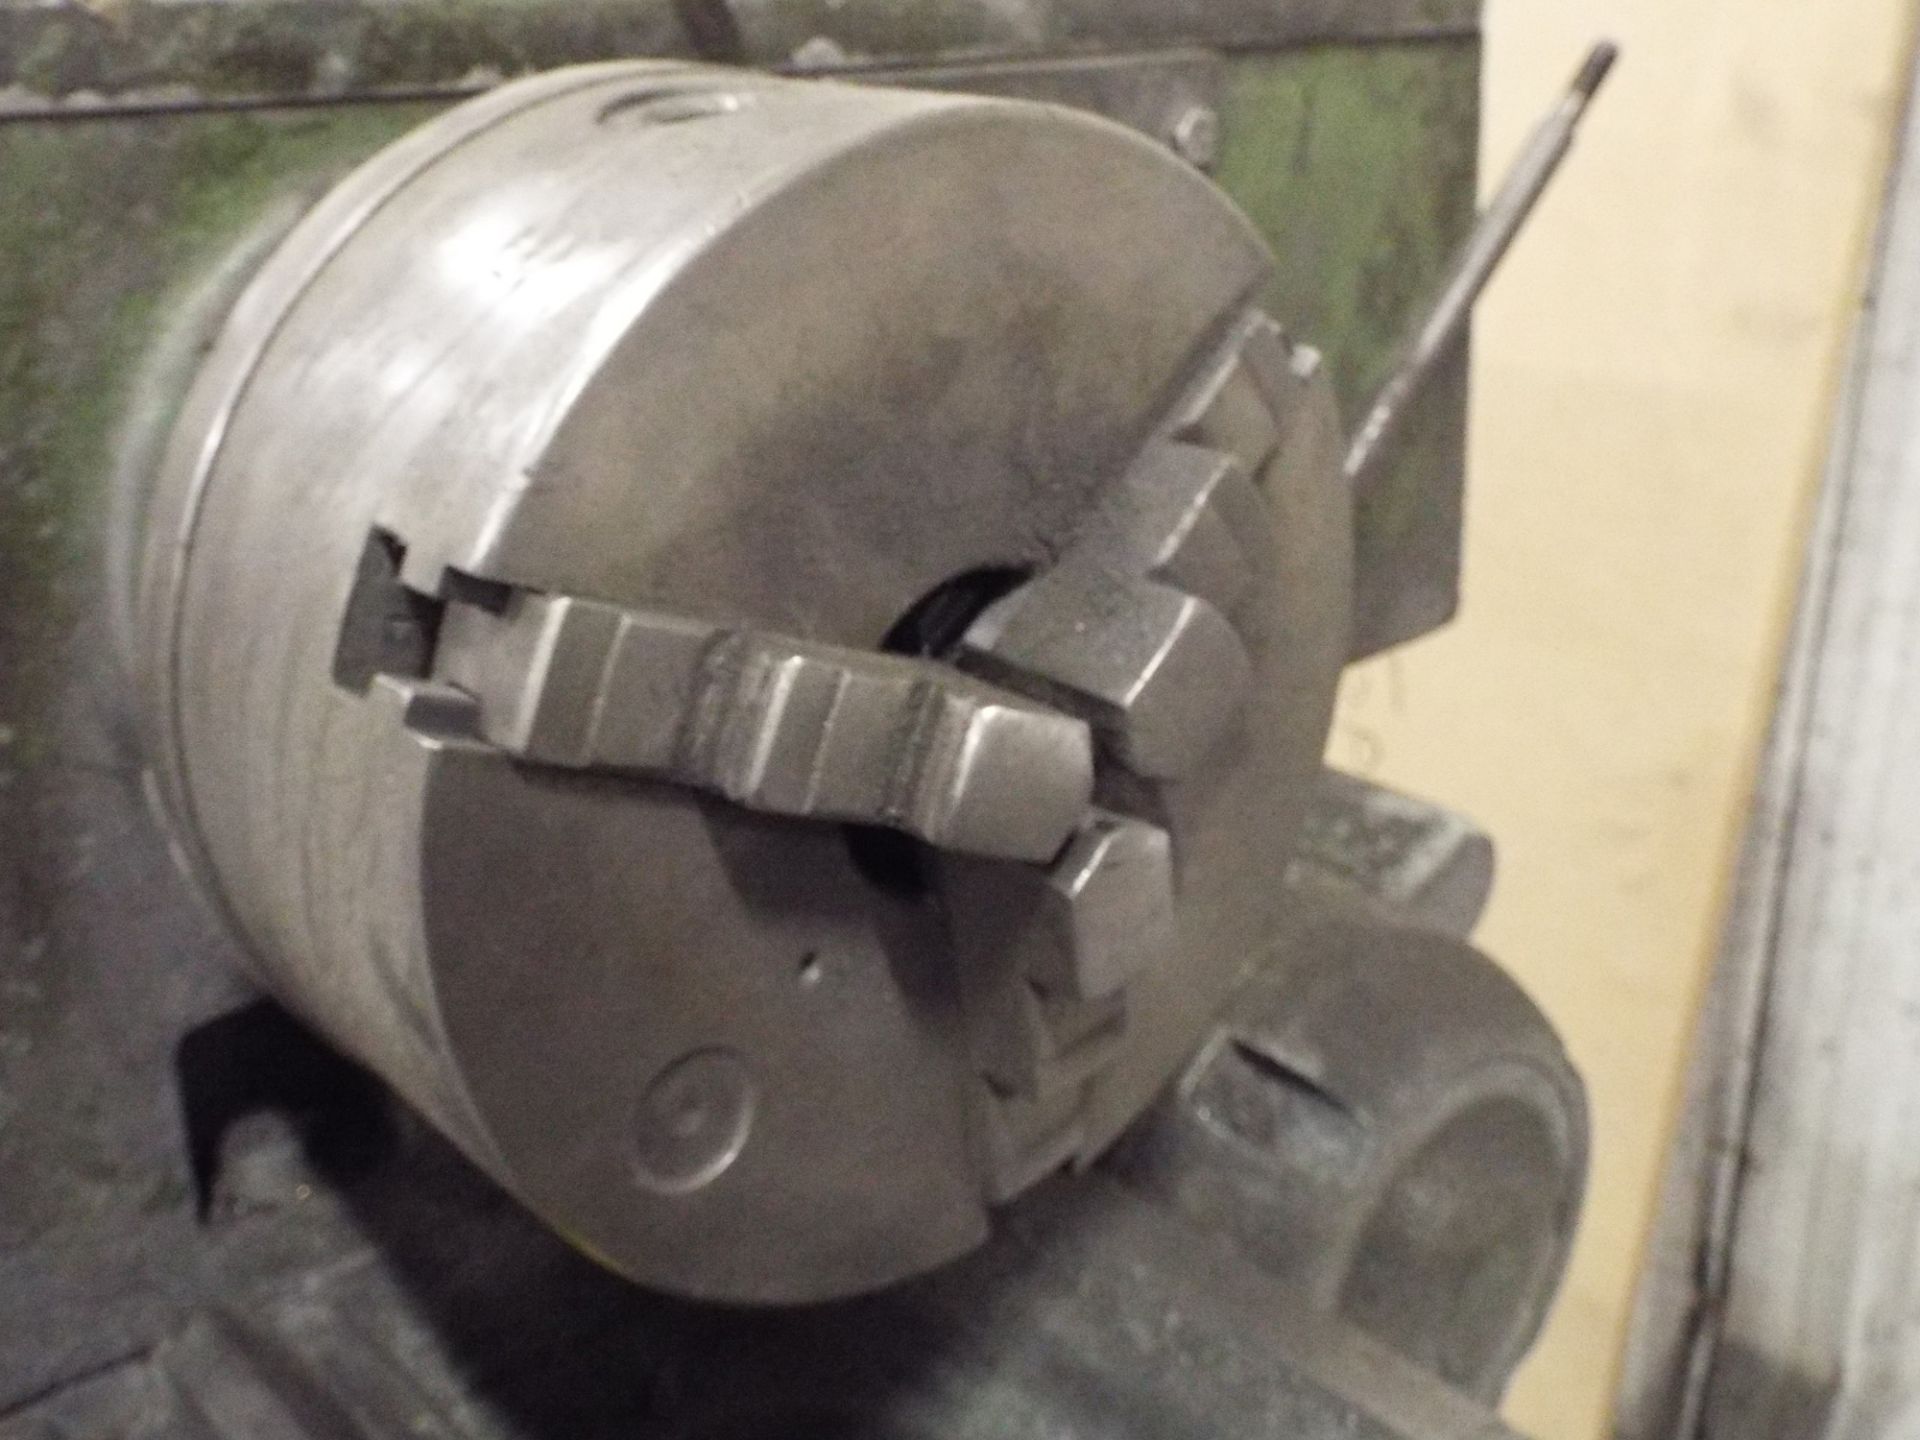 BUSY BEE DF-1237G GAP BED LATHE WITH 12" SWING, 37" BETWEEN CENTERS, AND 7.5" 3-JAW CHUCK, S/N: N/A - Image 3 of 4